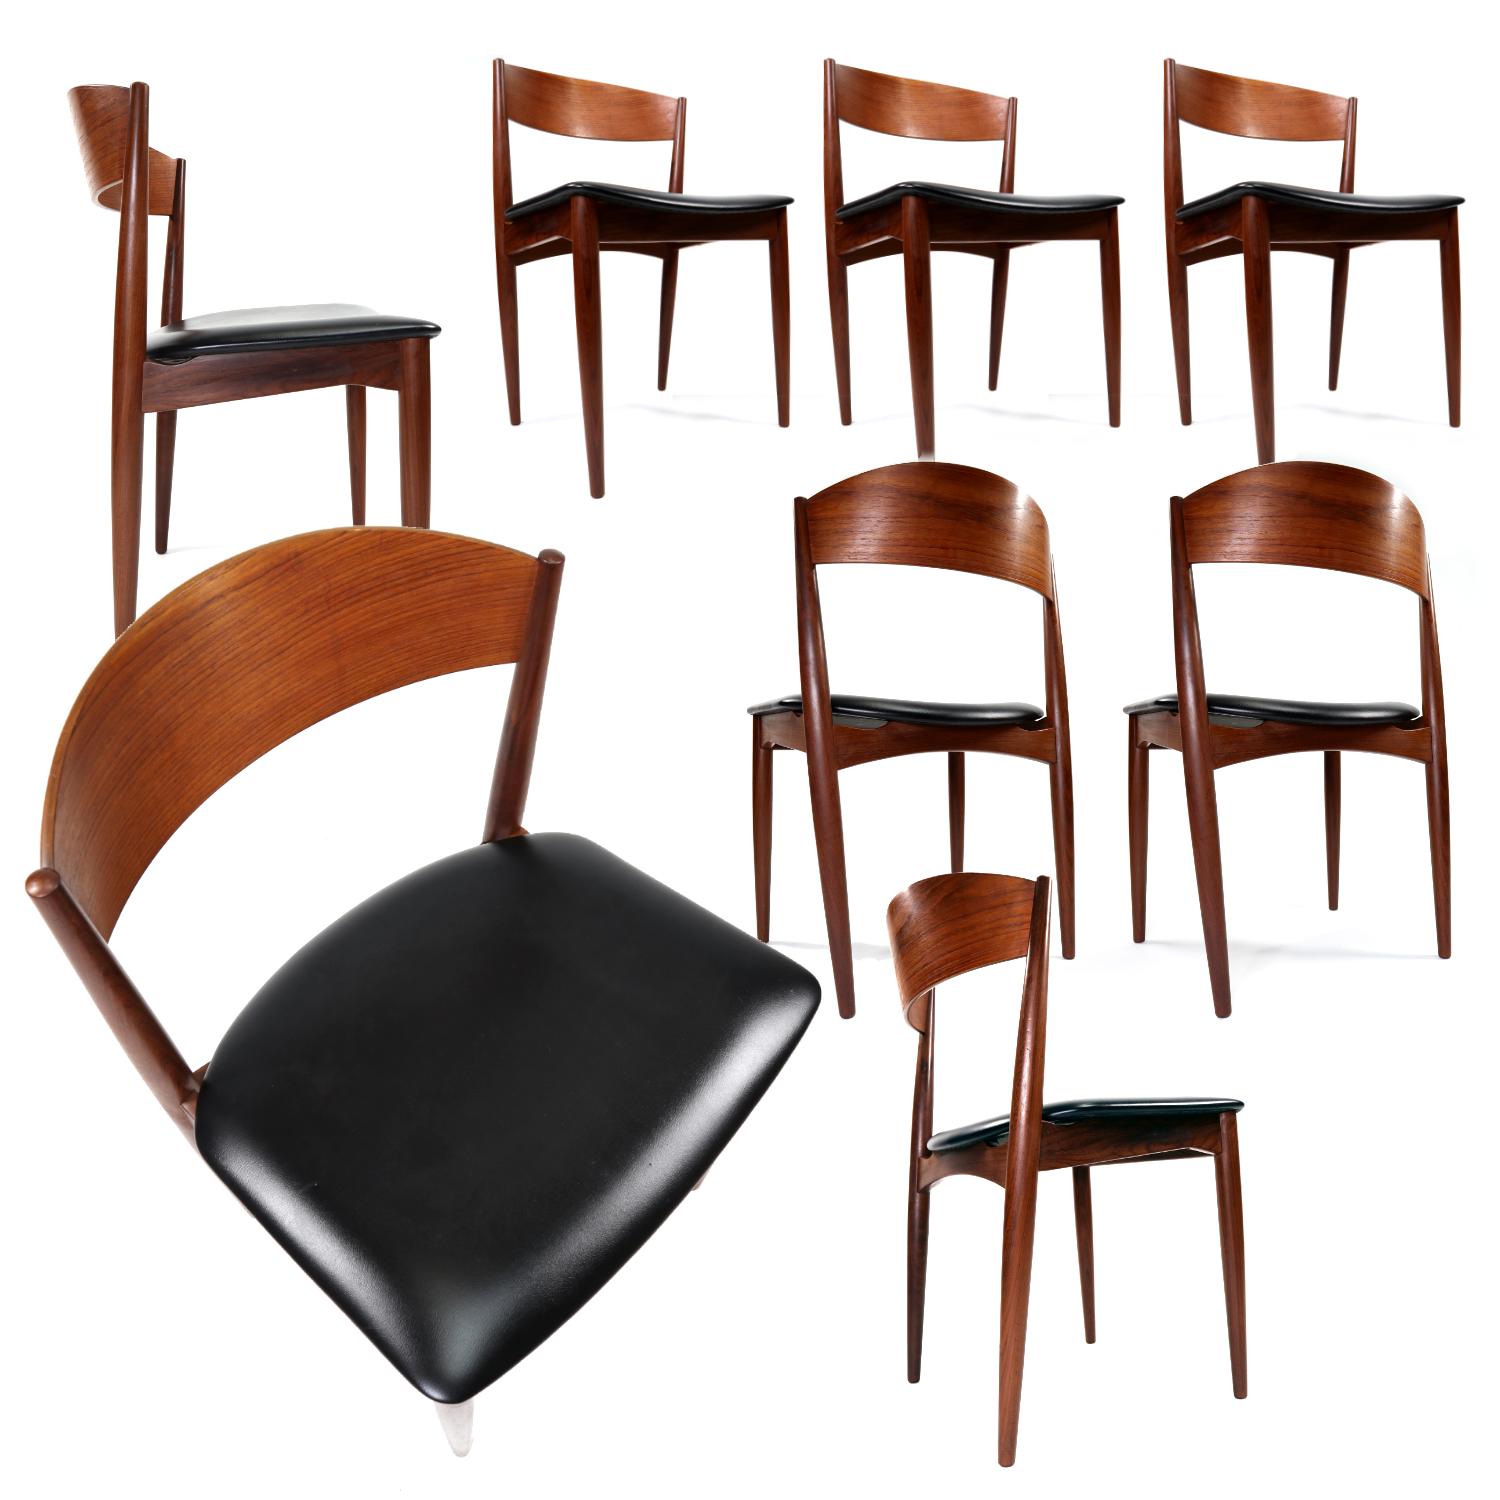 Elegant set of eight Danish teak dining chairs by Jydsk Møbelindustri Skanderborg. This set is exceptional in every expression of the word. One most view the chair from all angles to appreciate the full breadth of their grace. There wasn’t a portion